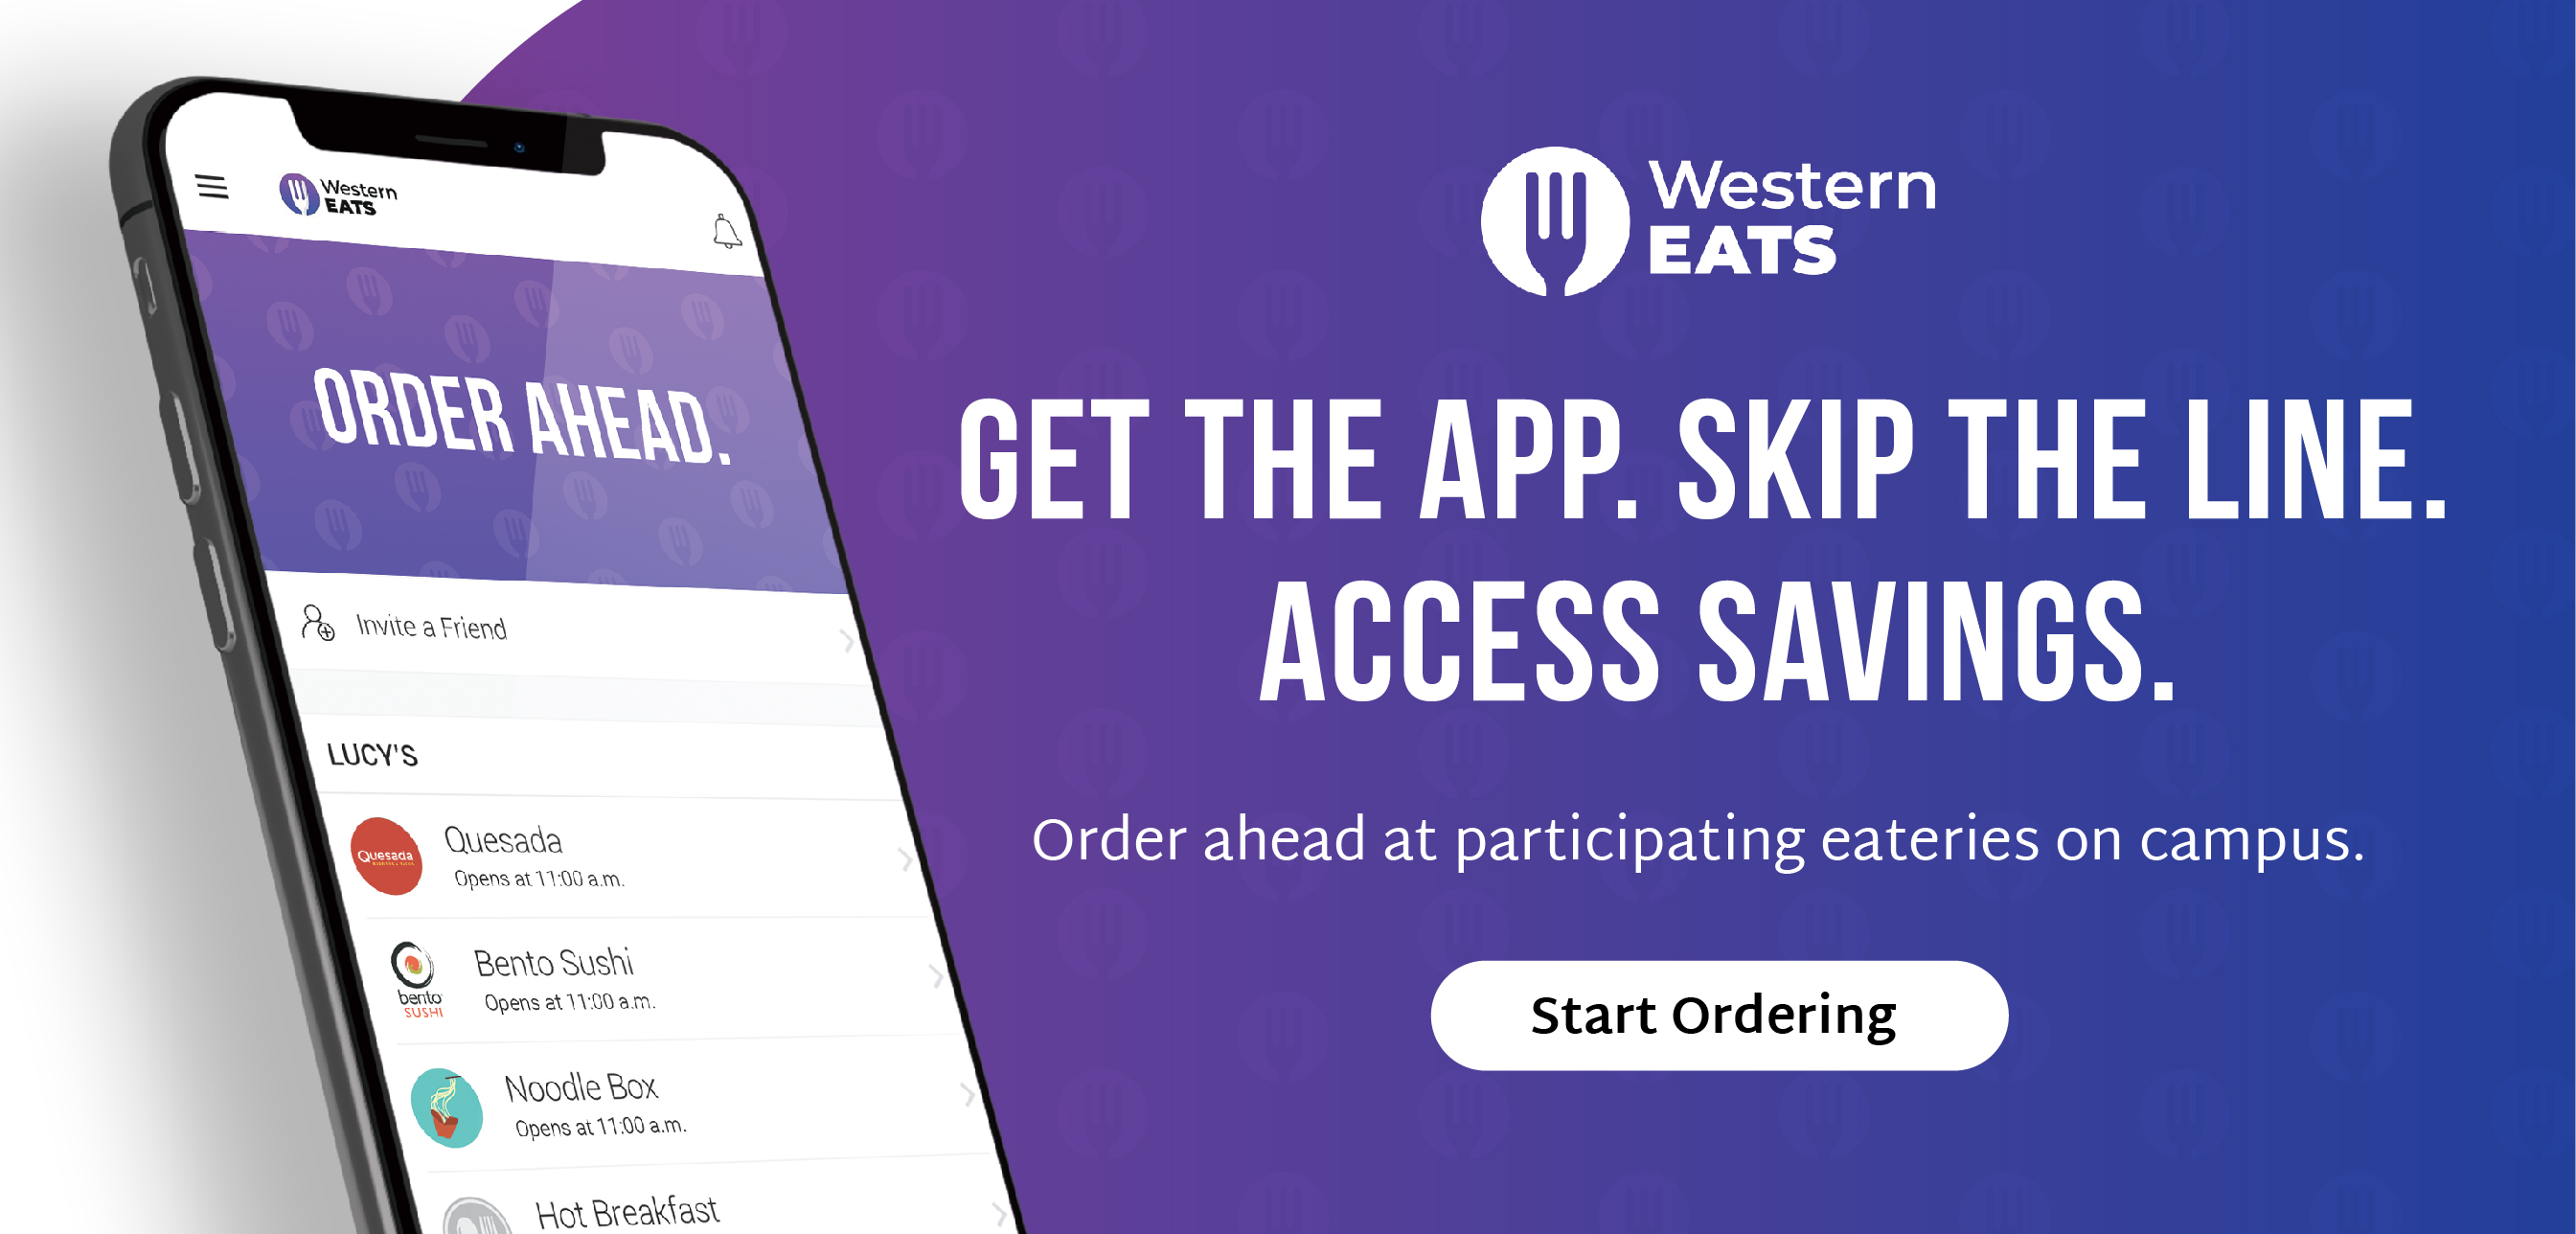 WesternEats. Get the app. Skip the line. Access savings. Order at participating eateries on campus. Start ordering.